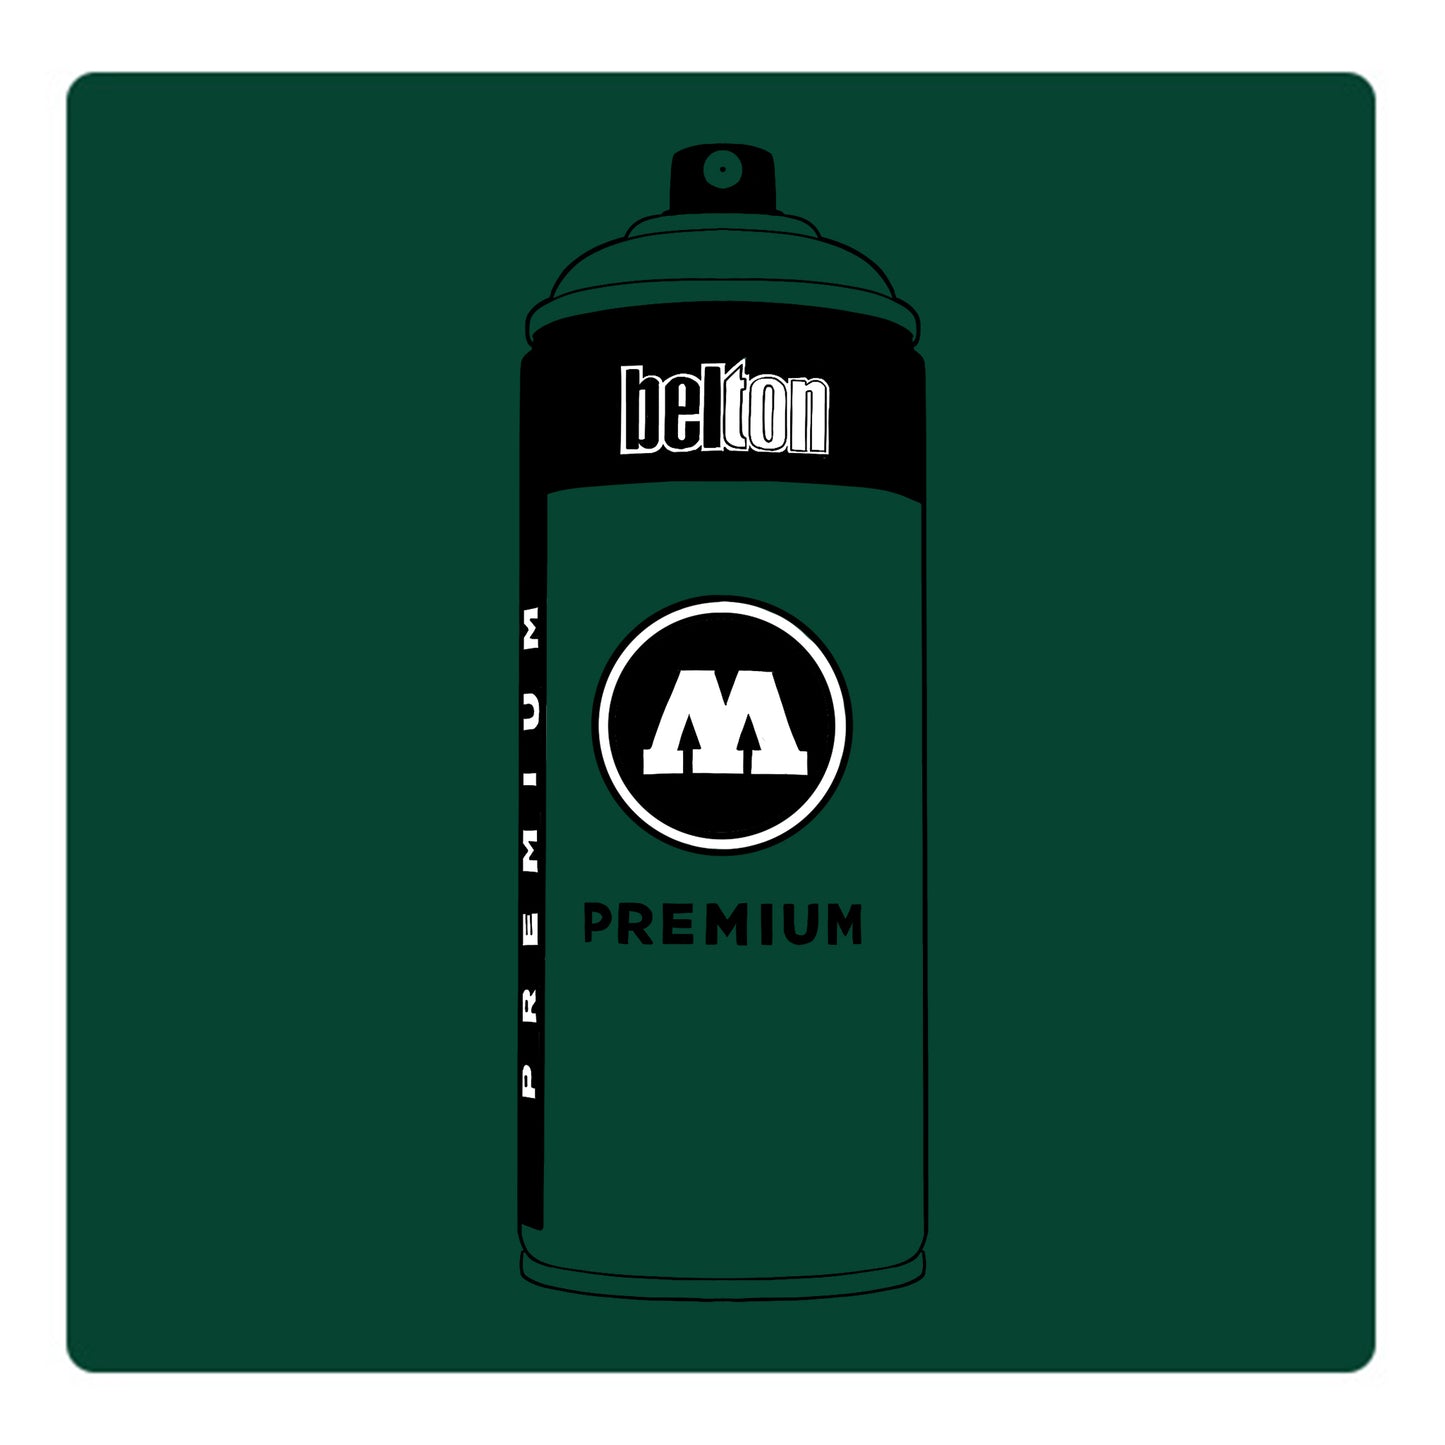 A black outline drawing of a dark emerald green spray paint can with the words "belton","premium" and the letter"M" written on the face in black and white font. The background is a color swatch of the same dark emerald green with a white border